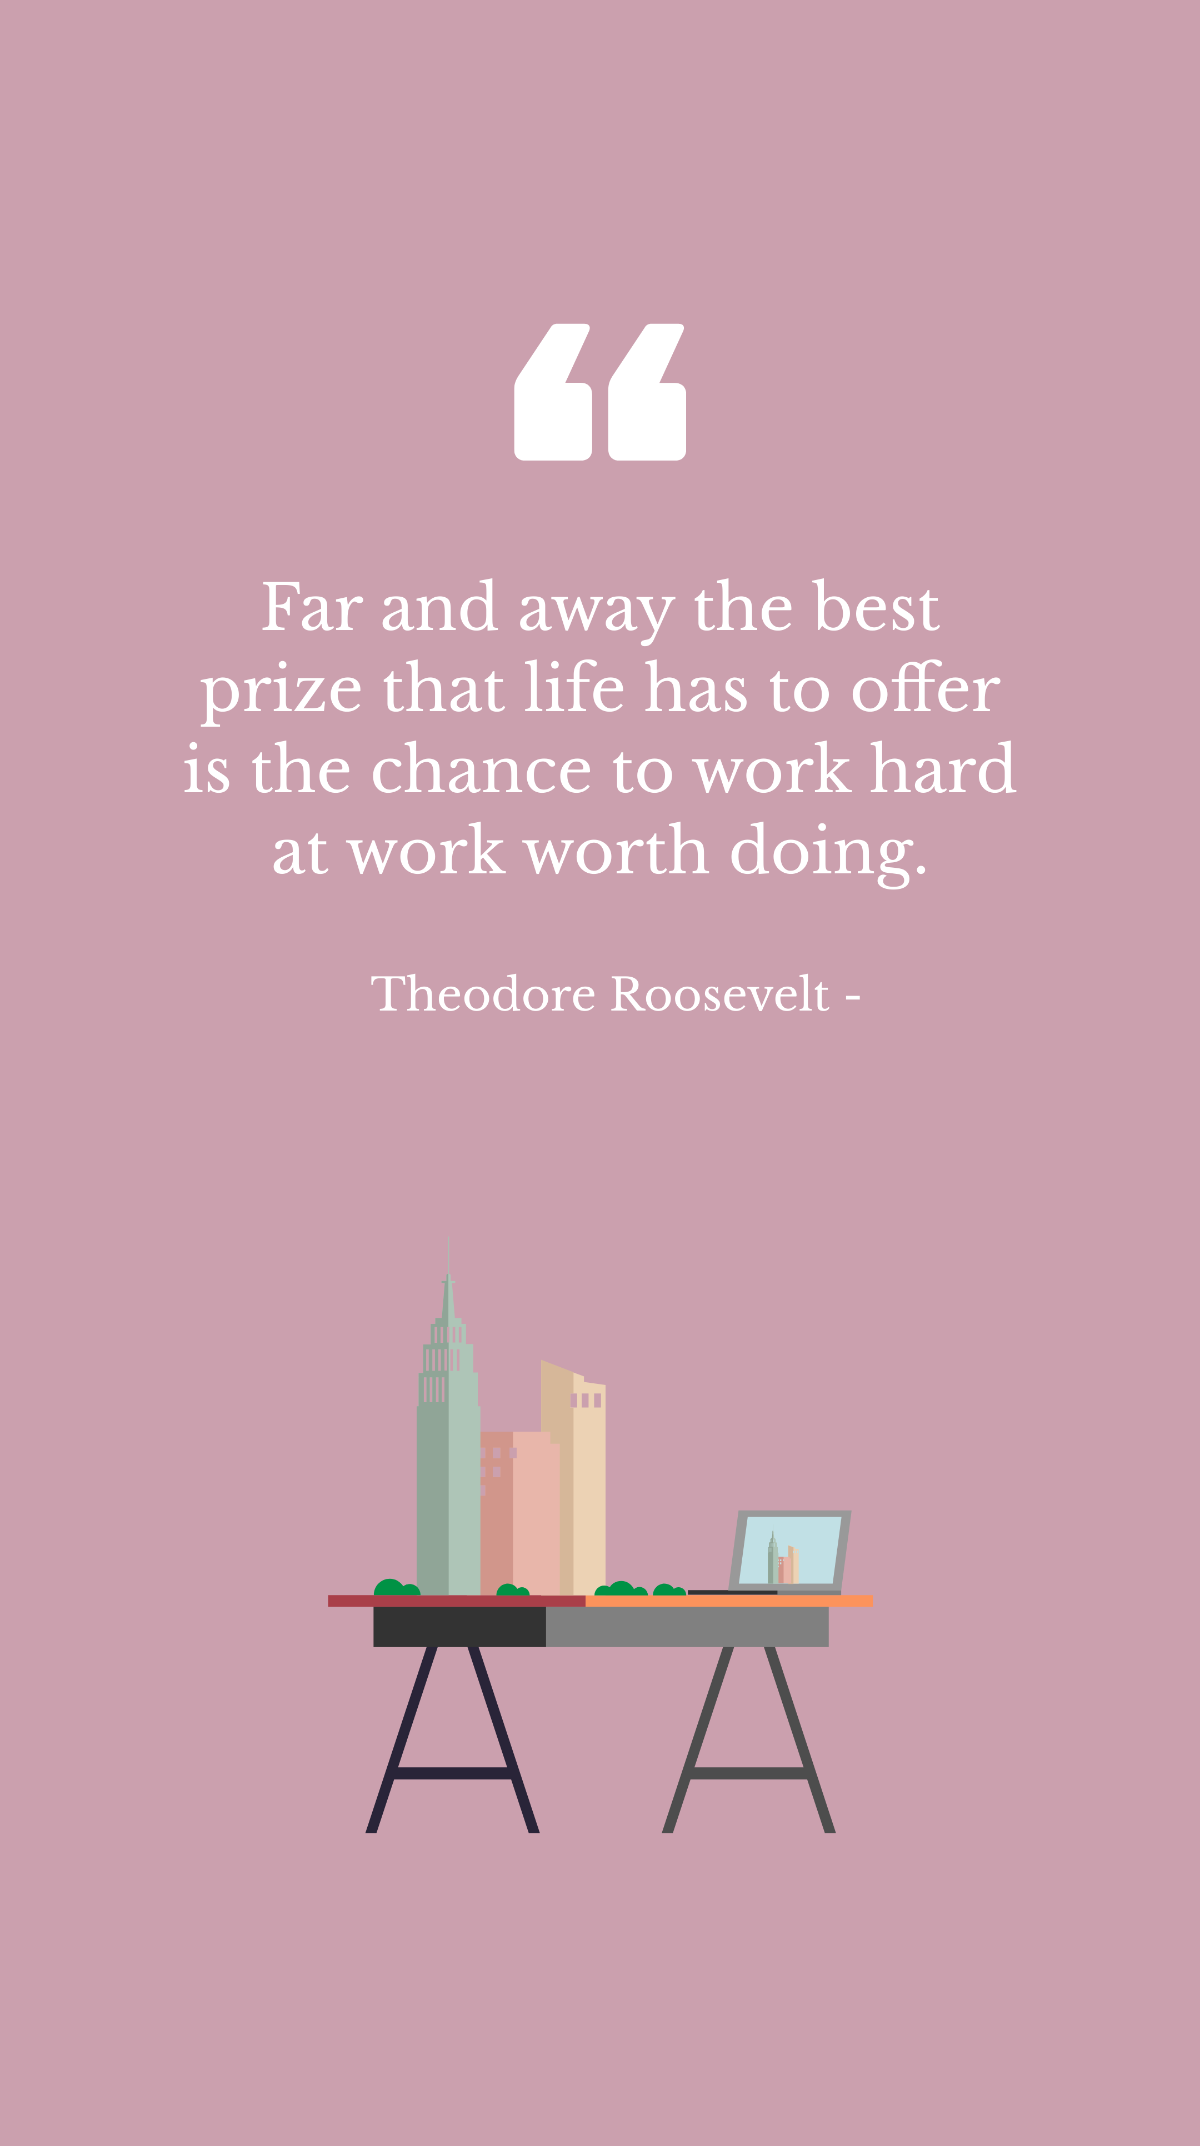 Free Theodore Roosevelt - Far and away the best prize that life has to offer is the chance to work hard at work worth doing. Template